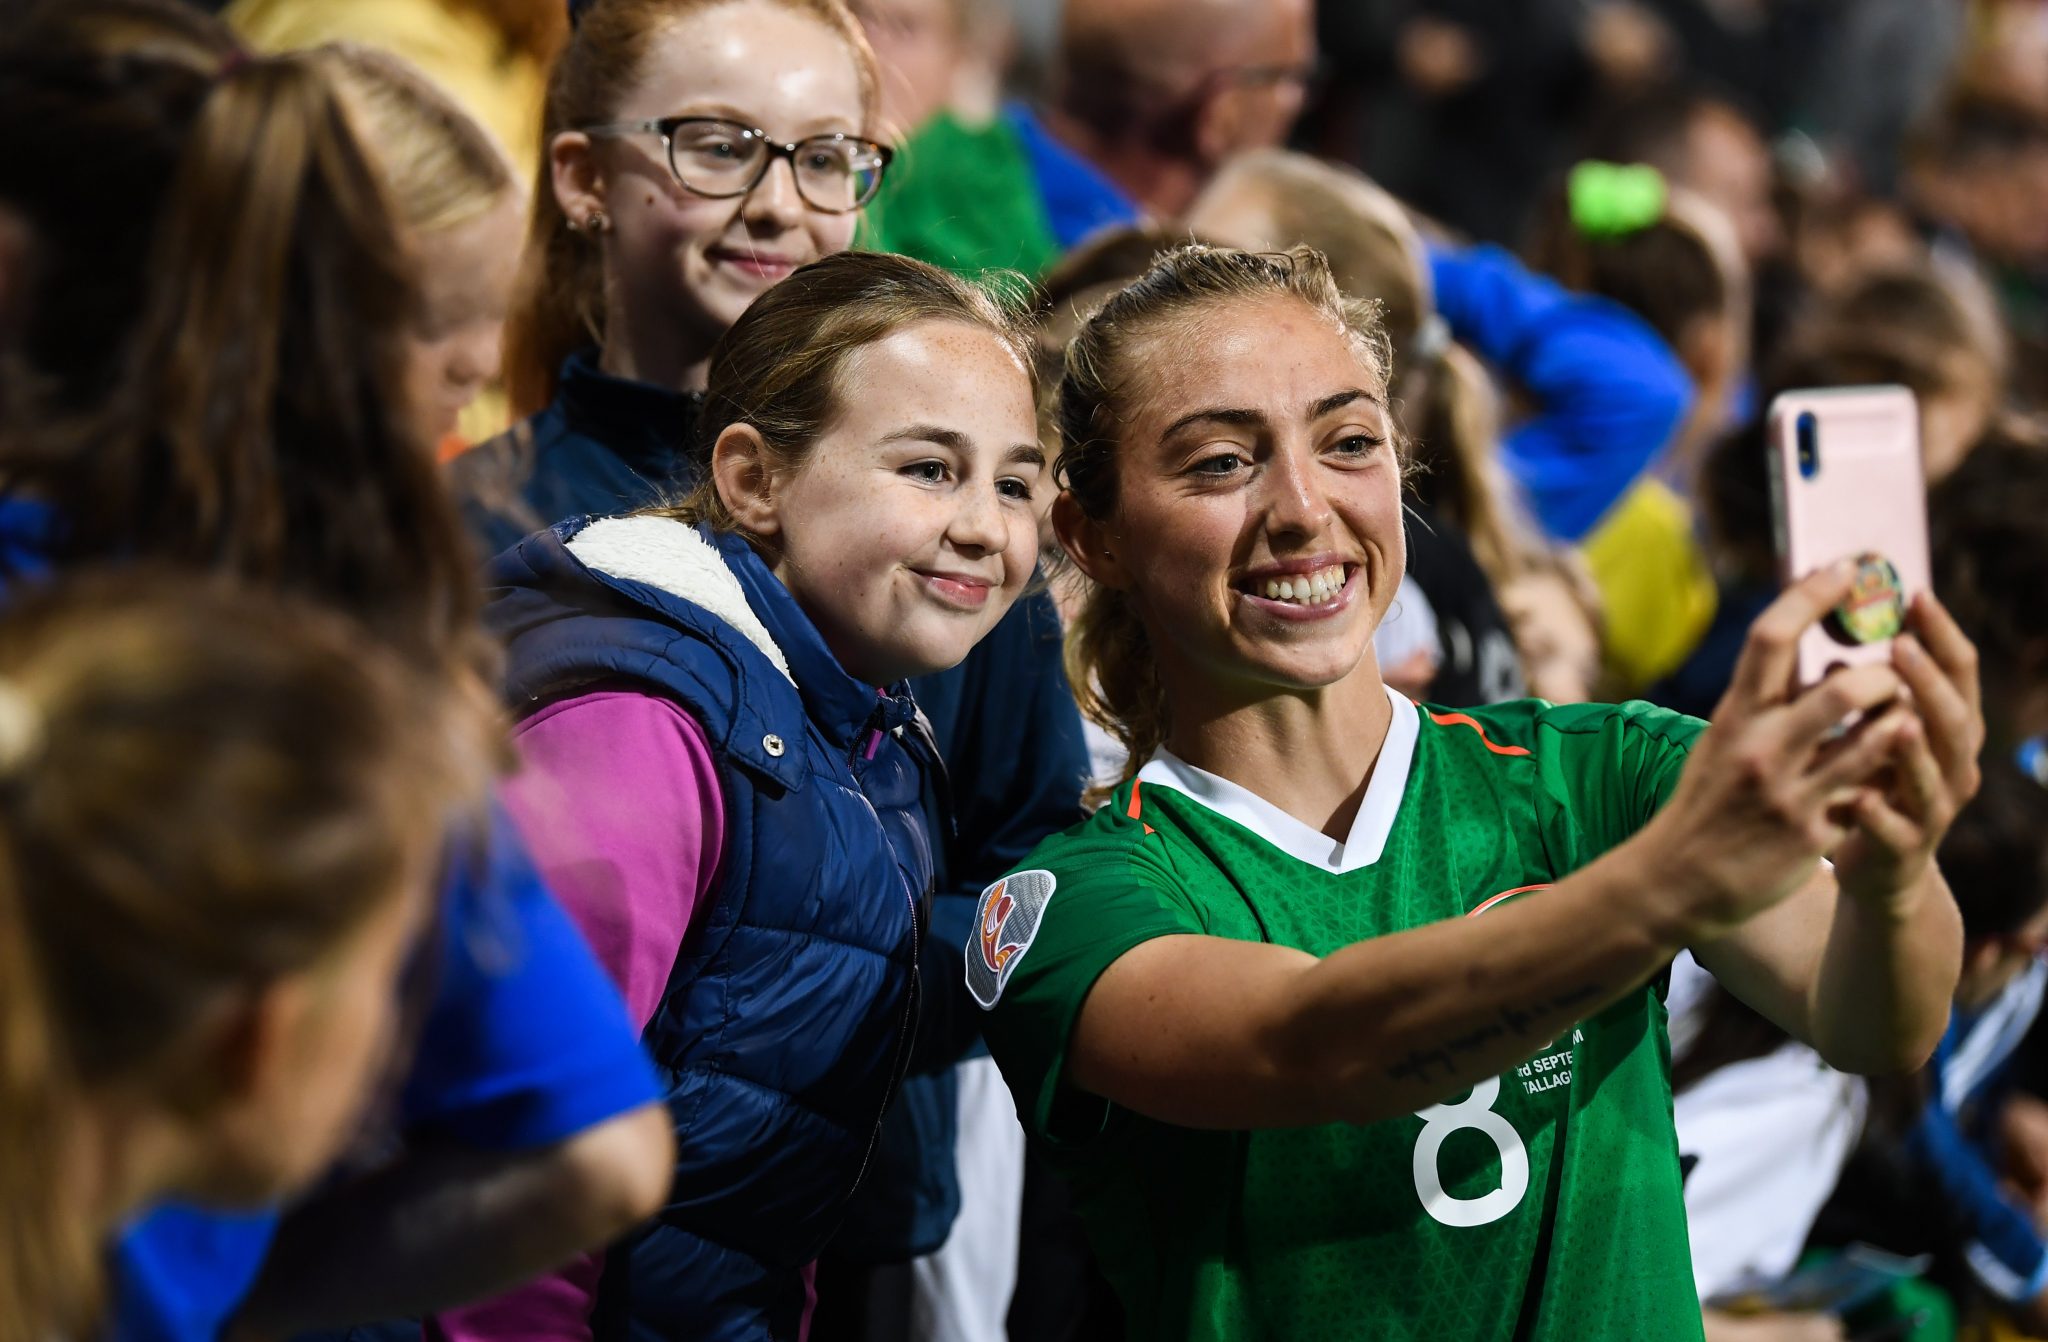 Ireland’s new women’s soccer coach names her first squad (and we want your family to support them!)